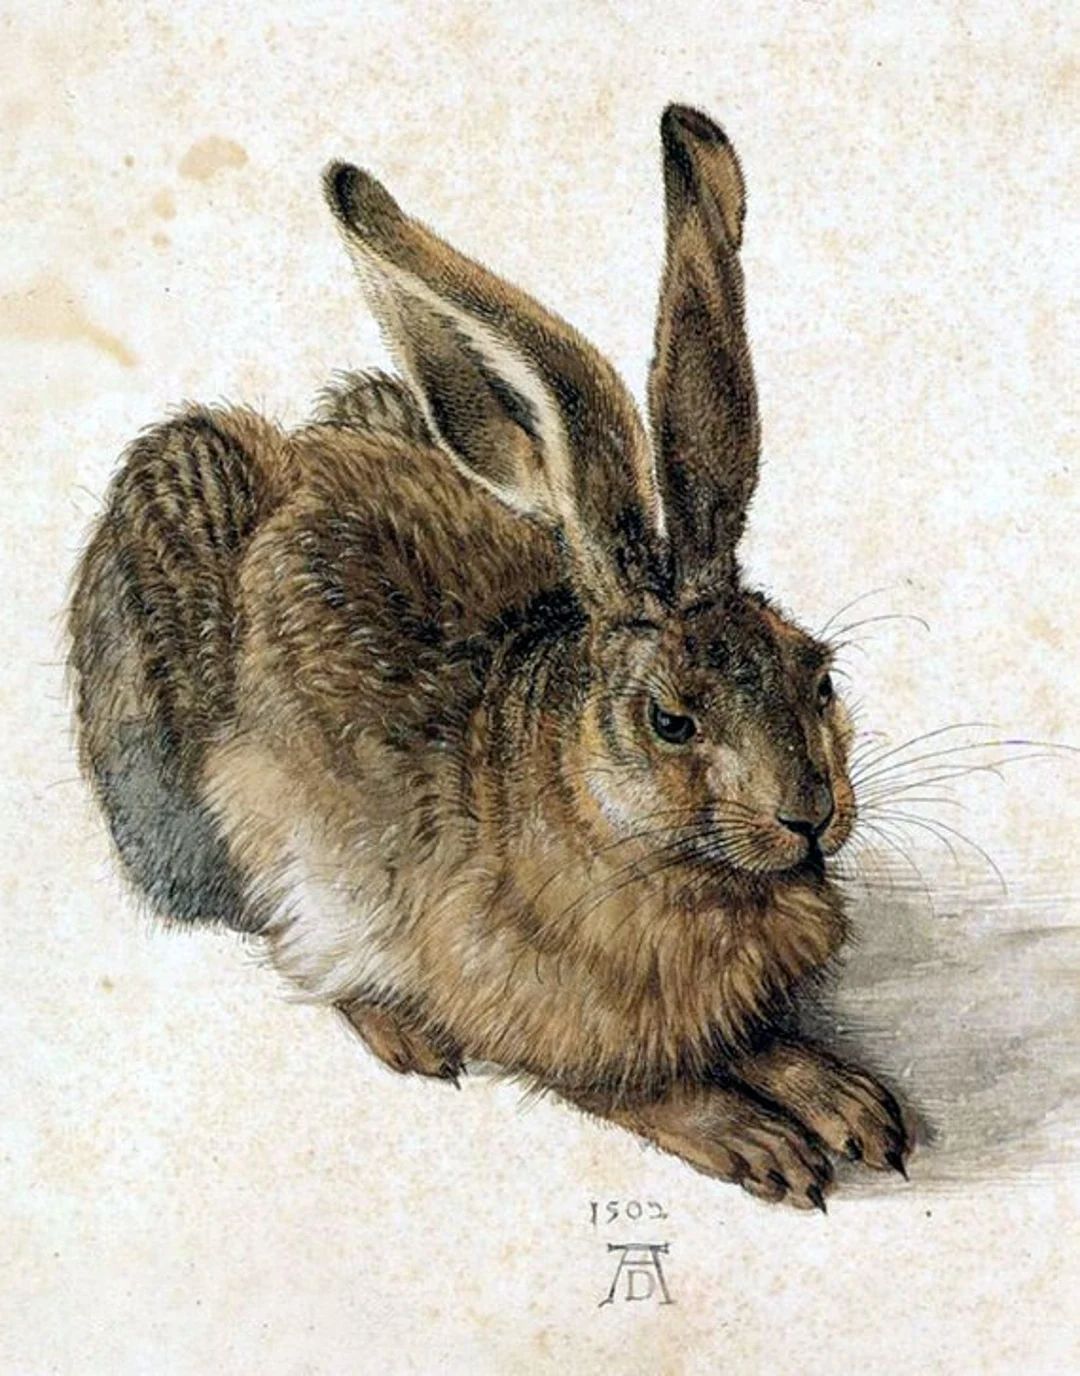 Albrecht Durer-young Hare 1500s Rabbits Bunny Animal Art - Etsy | Etsy (US)